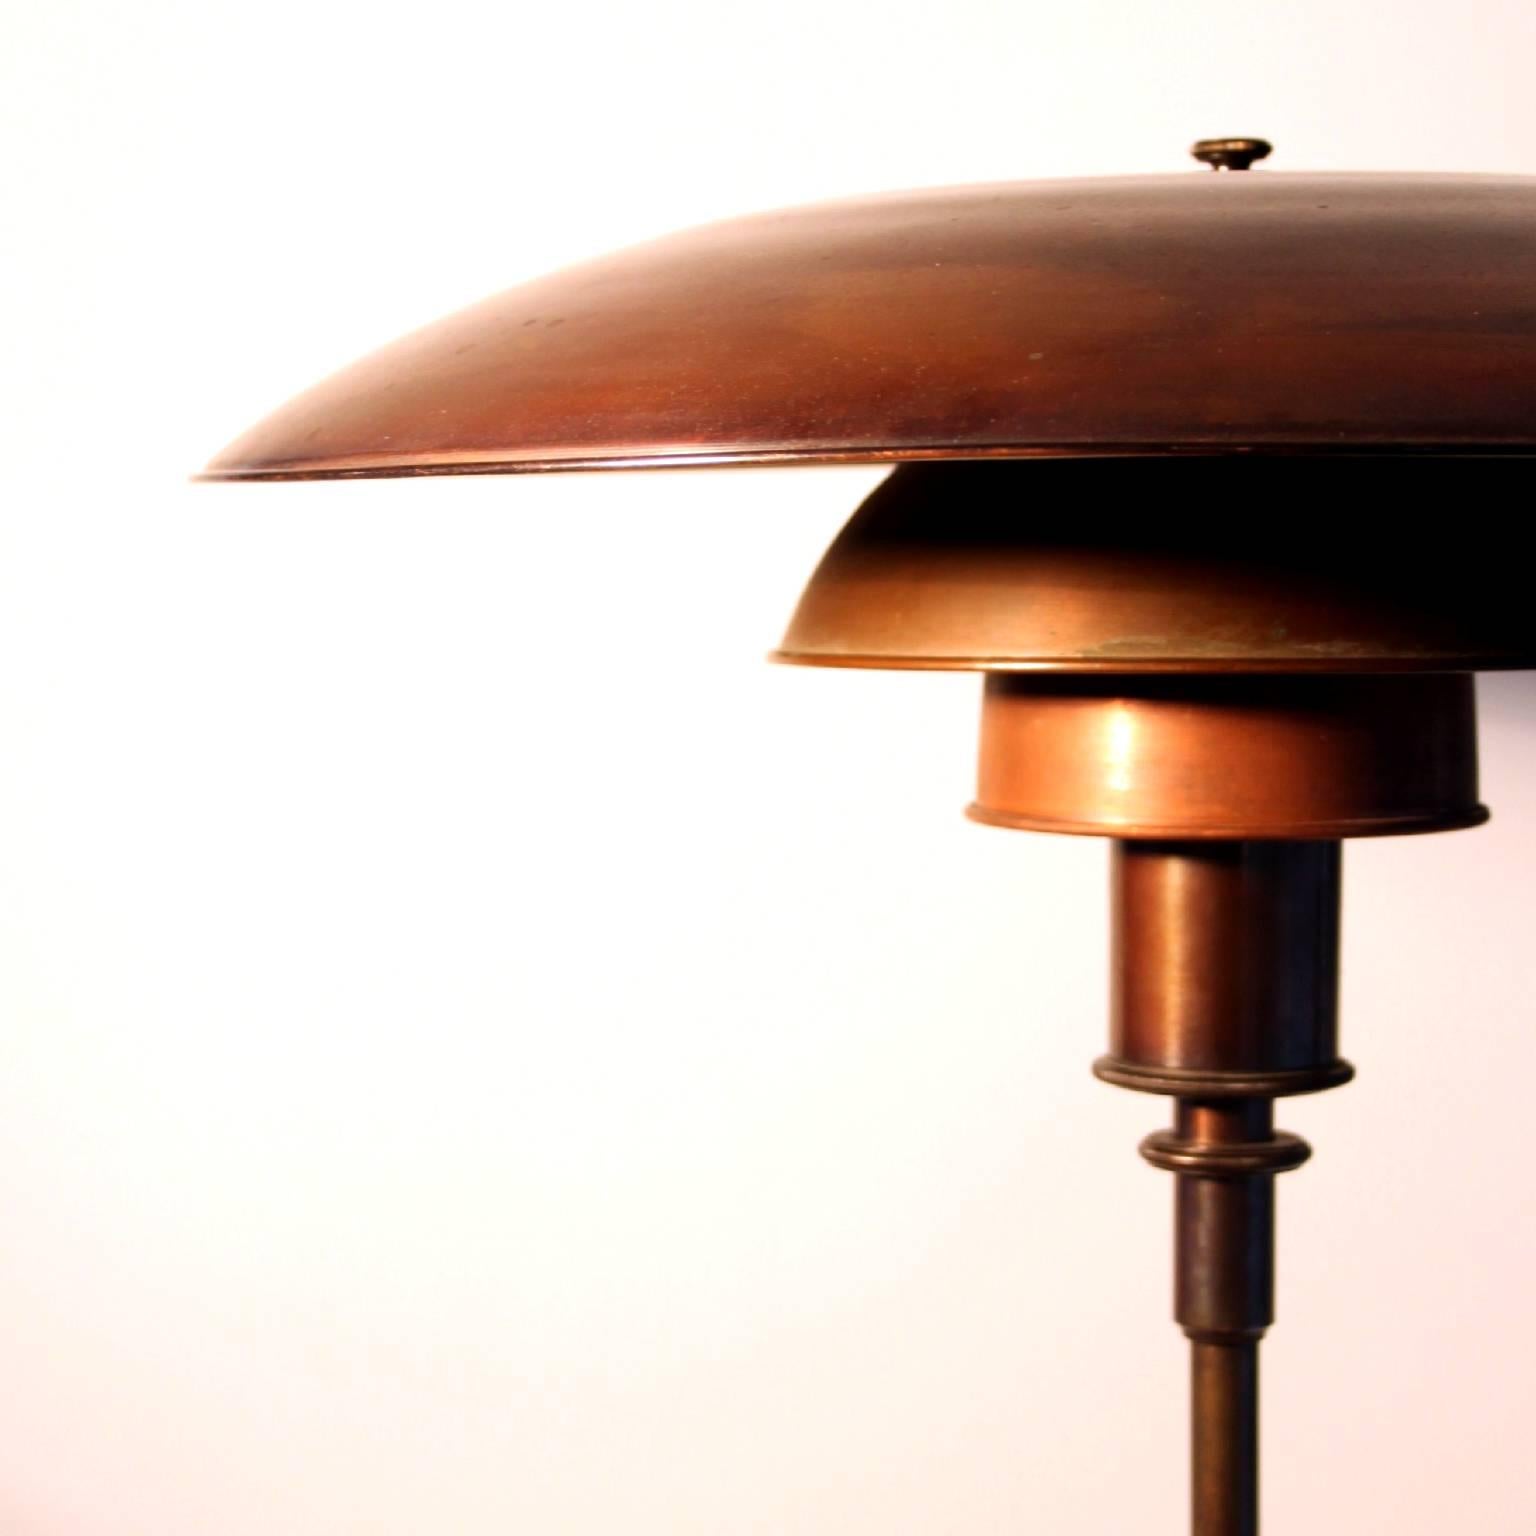 Rare Poul Henningsen 4½/3 table lamp with original copper shades.

Stand, switch and socket house of browned brass.

Designed 1927 and manufactured by Louis Poulsen 1920-1930.

Stamped PAT APPL.

Excellent original condition.

Measures: H